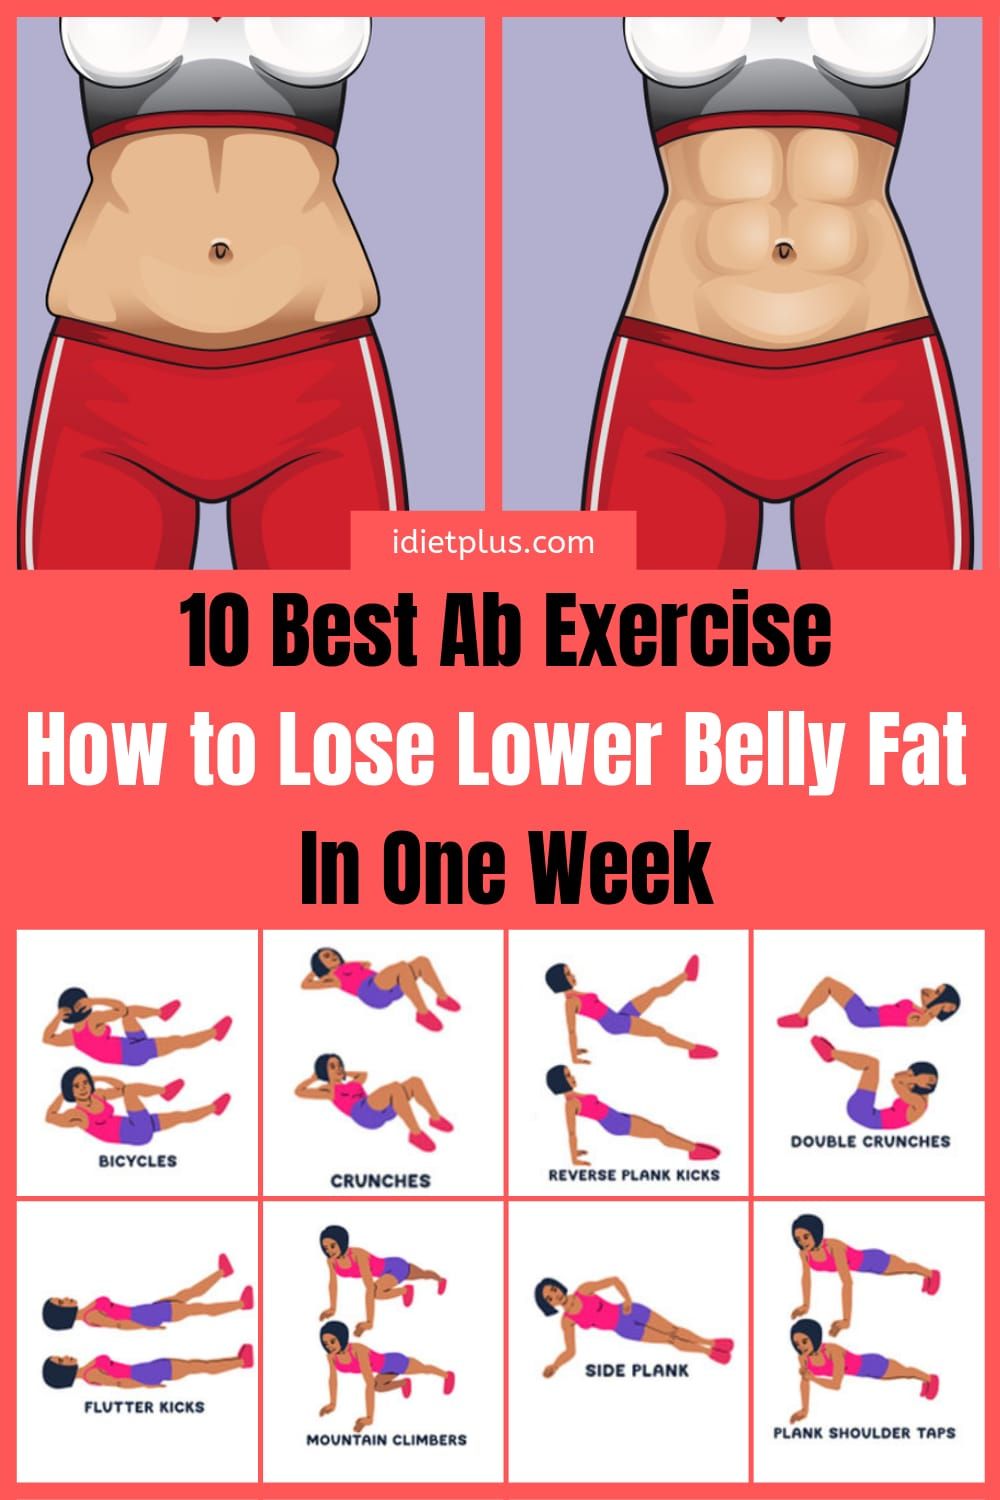 10 Best Ab Exercise â How to Lose Lower Belly Fat in One Week